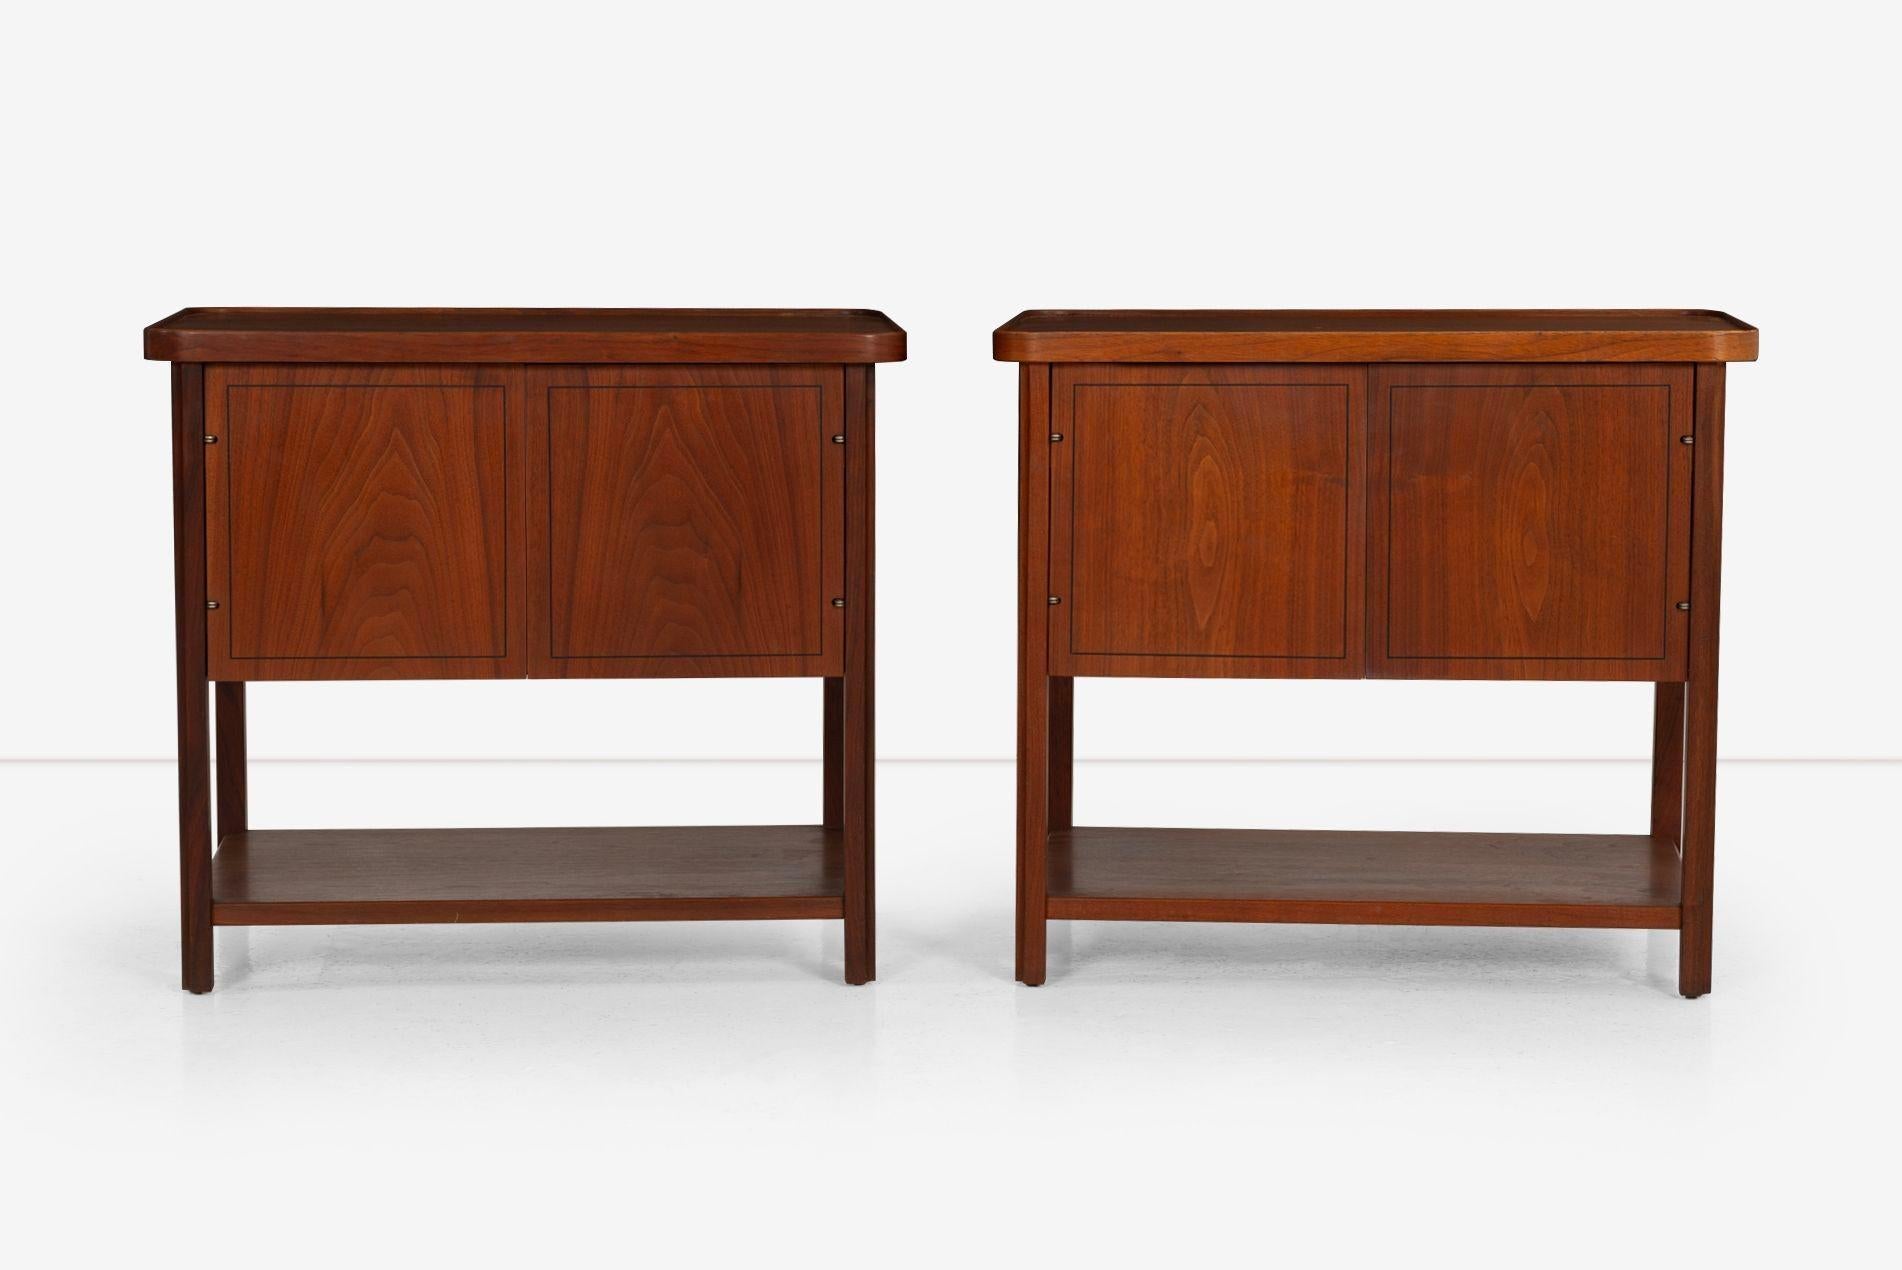 Pair of Nightstands by Jack Cartwright for Founders Furniture
Oiled walnut, radius top with 1/4